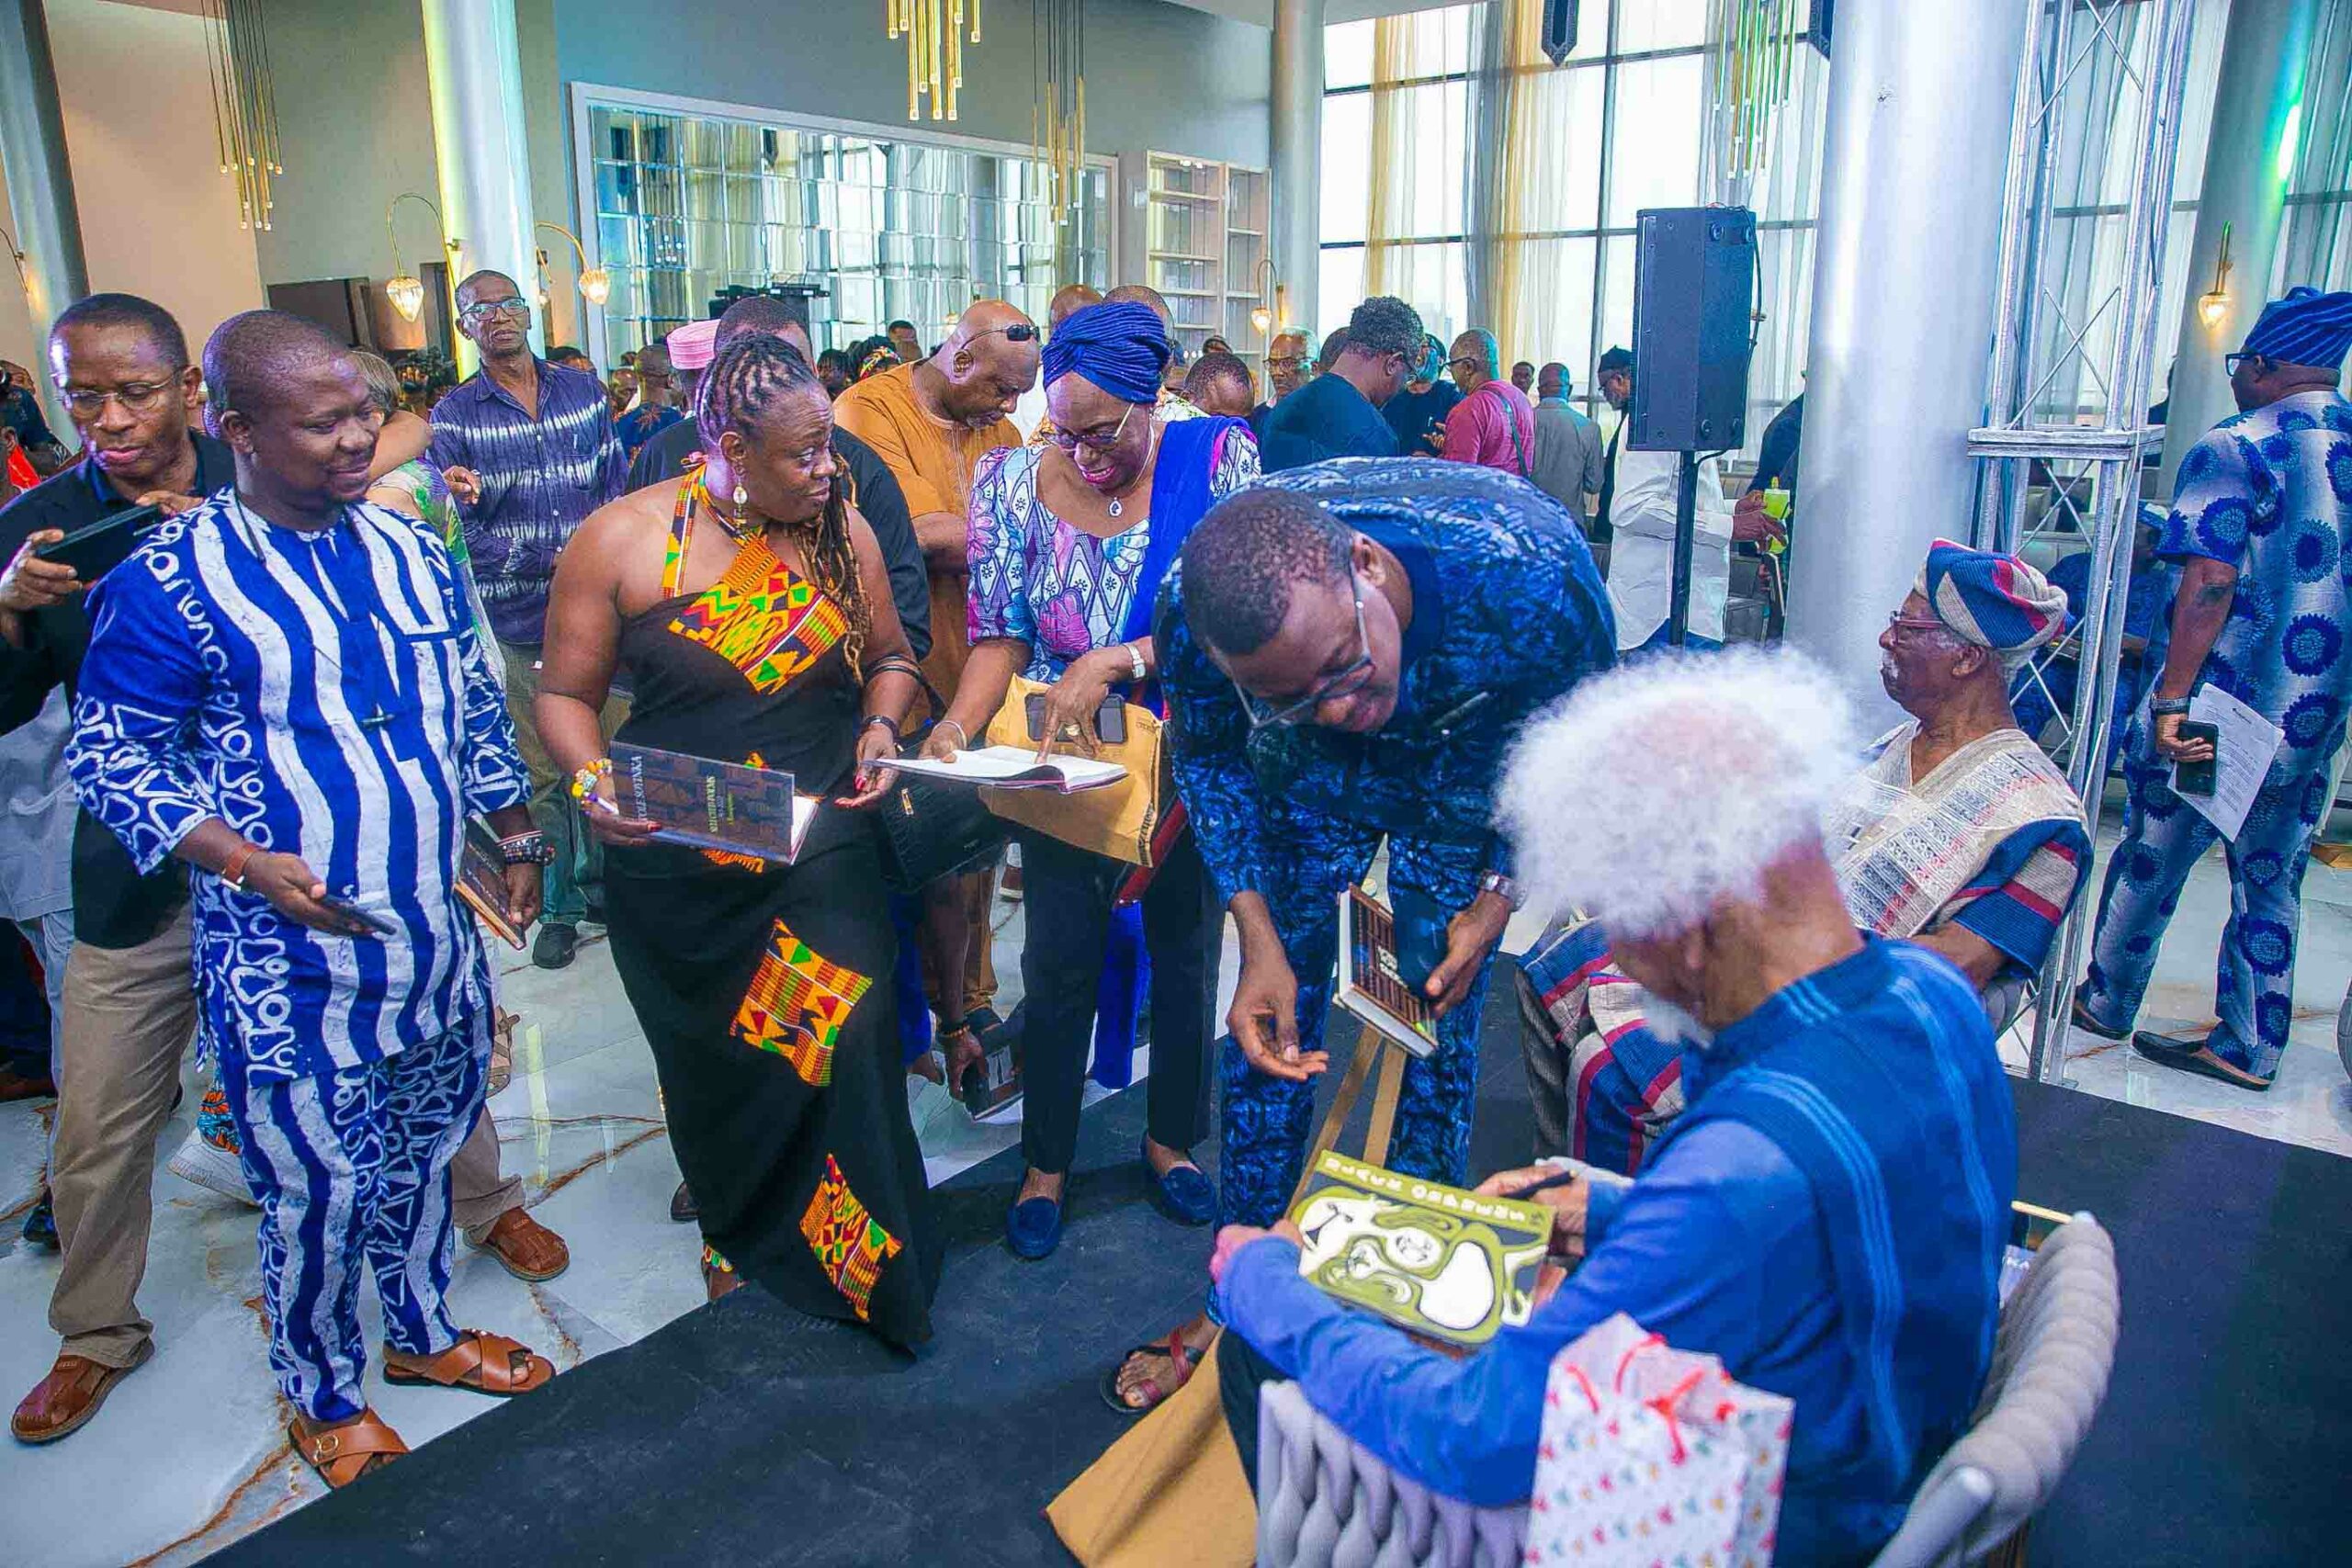 Prof Wole Soyinka at the book signing after the event